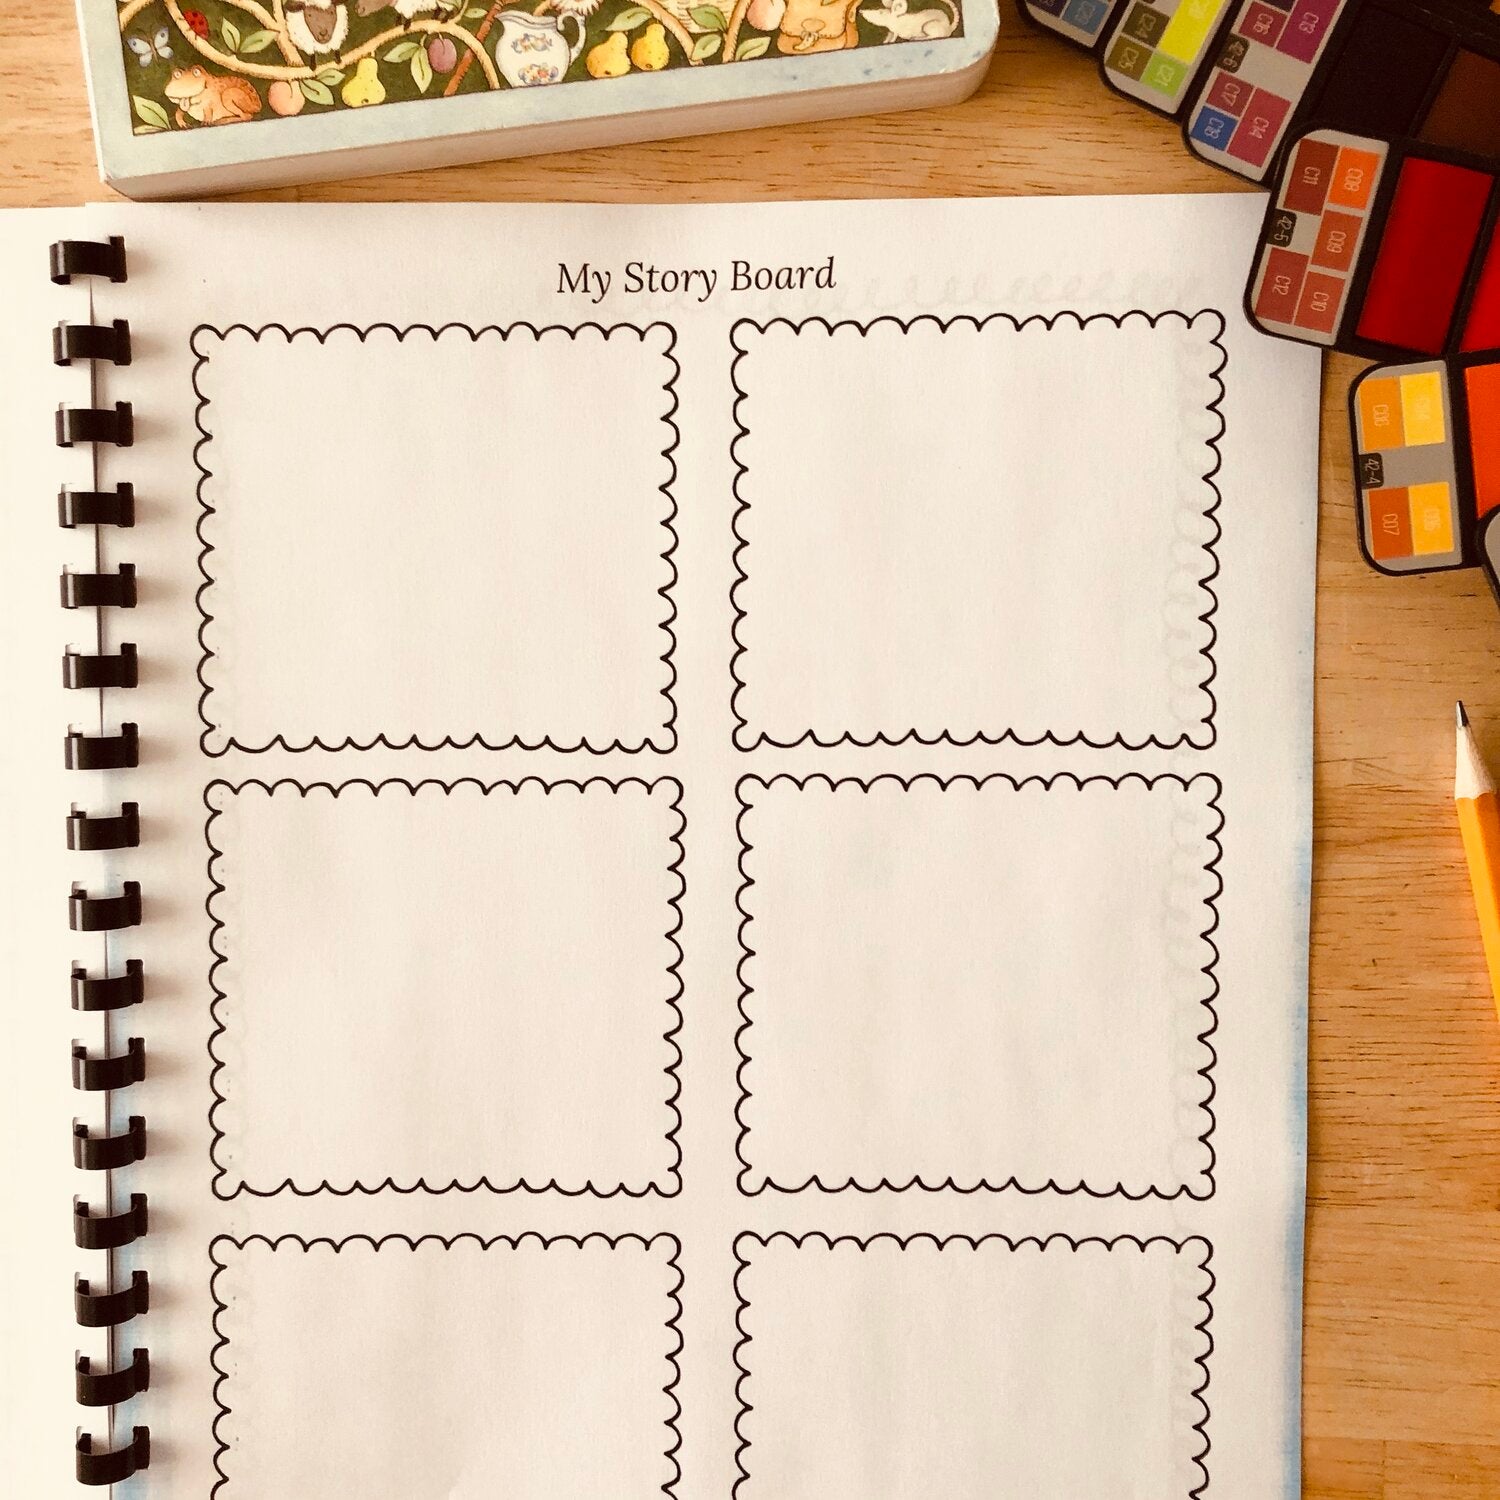 Read, Draw and Retell Student Worksheets